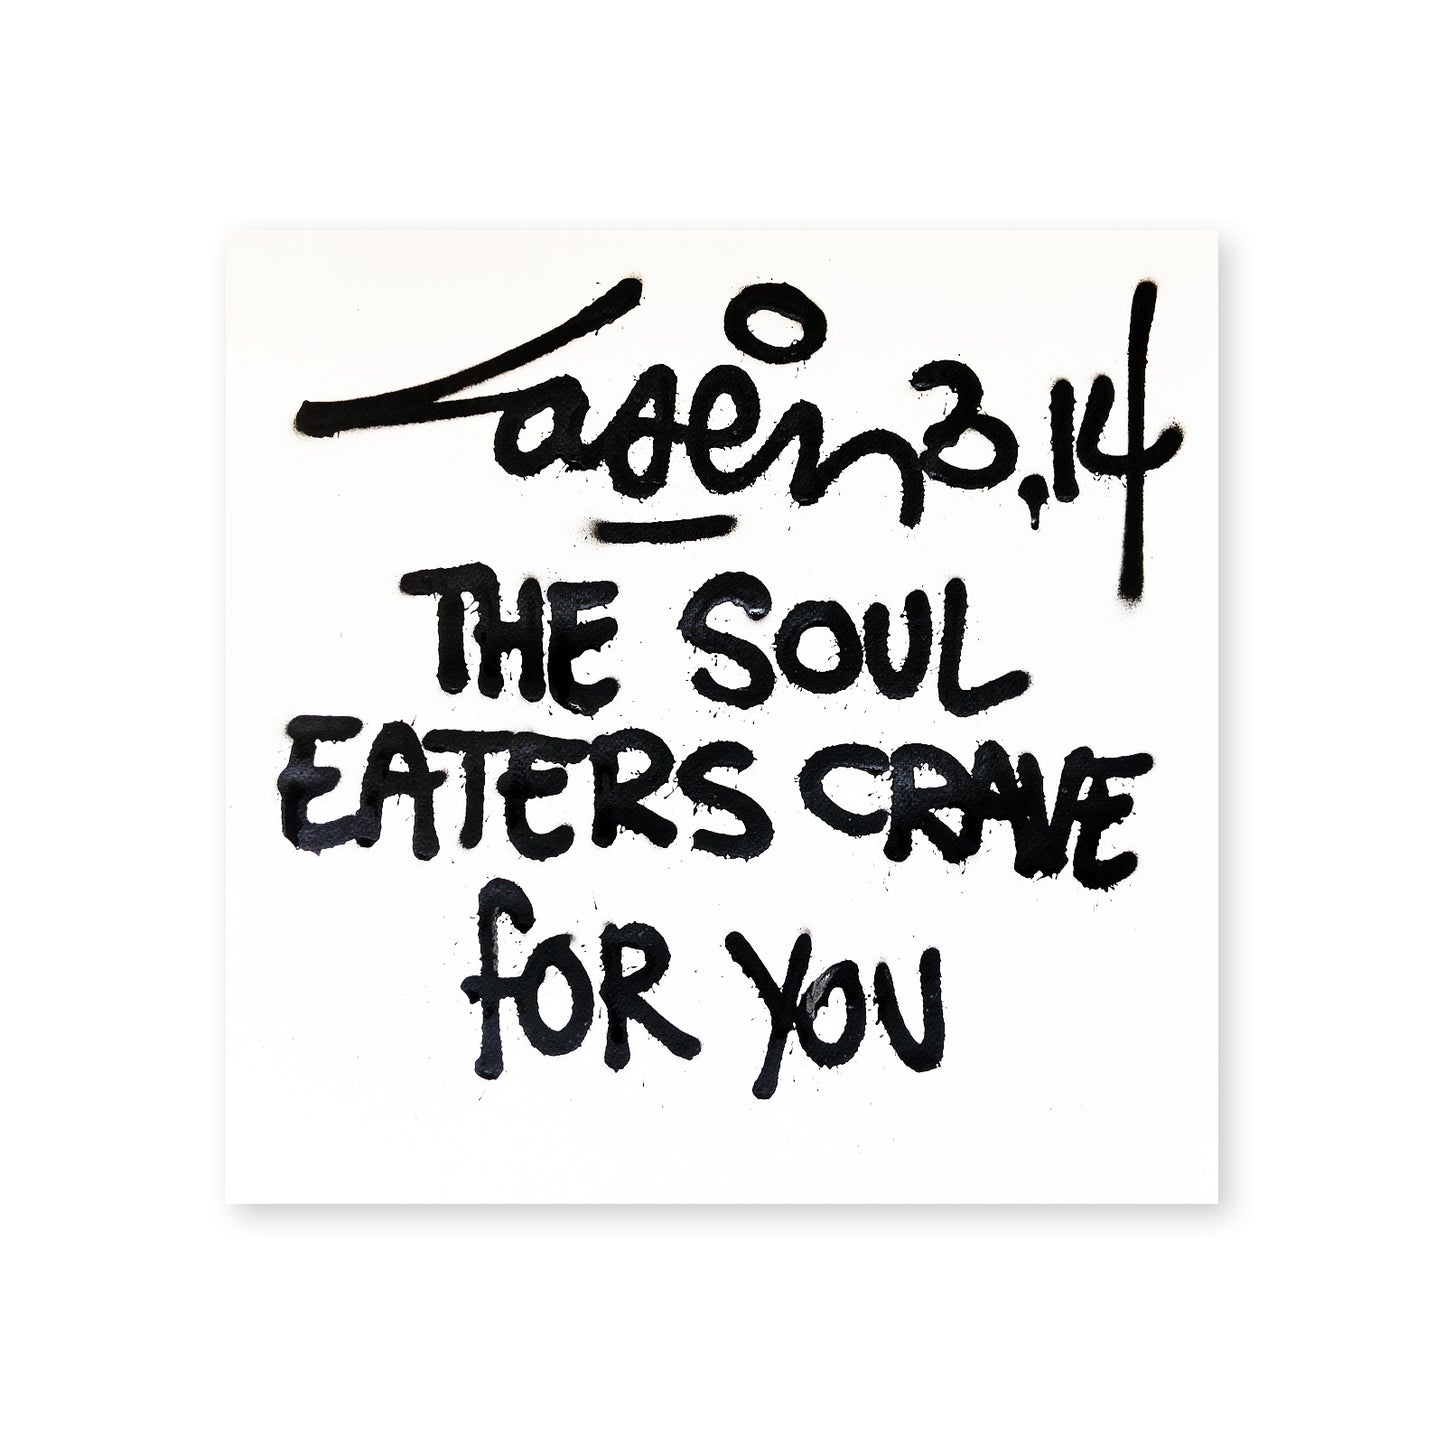 The Soul Eaters Crave For You